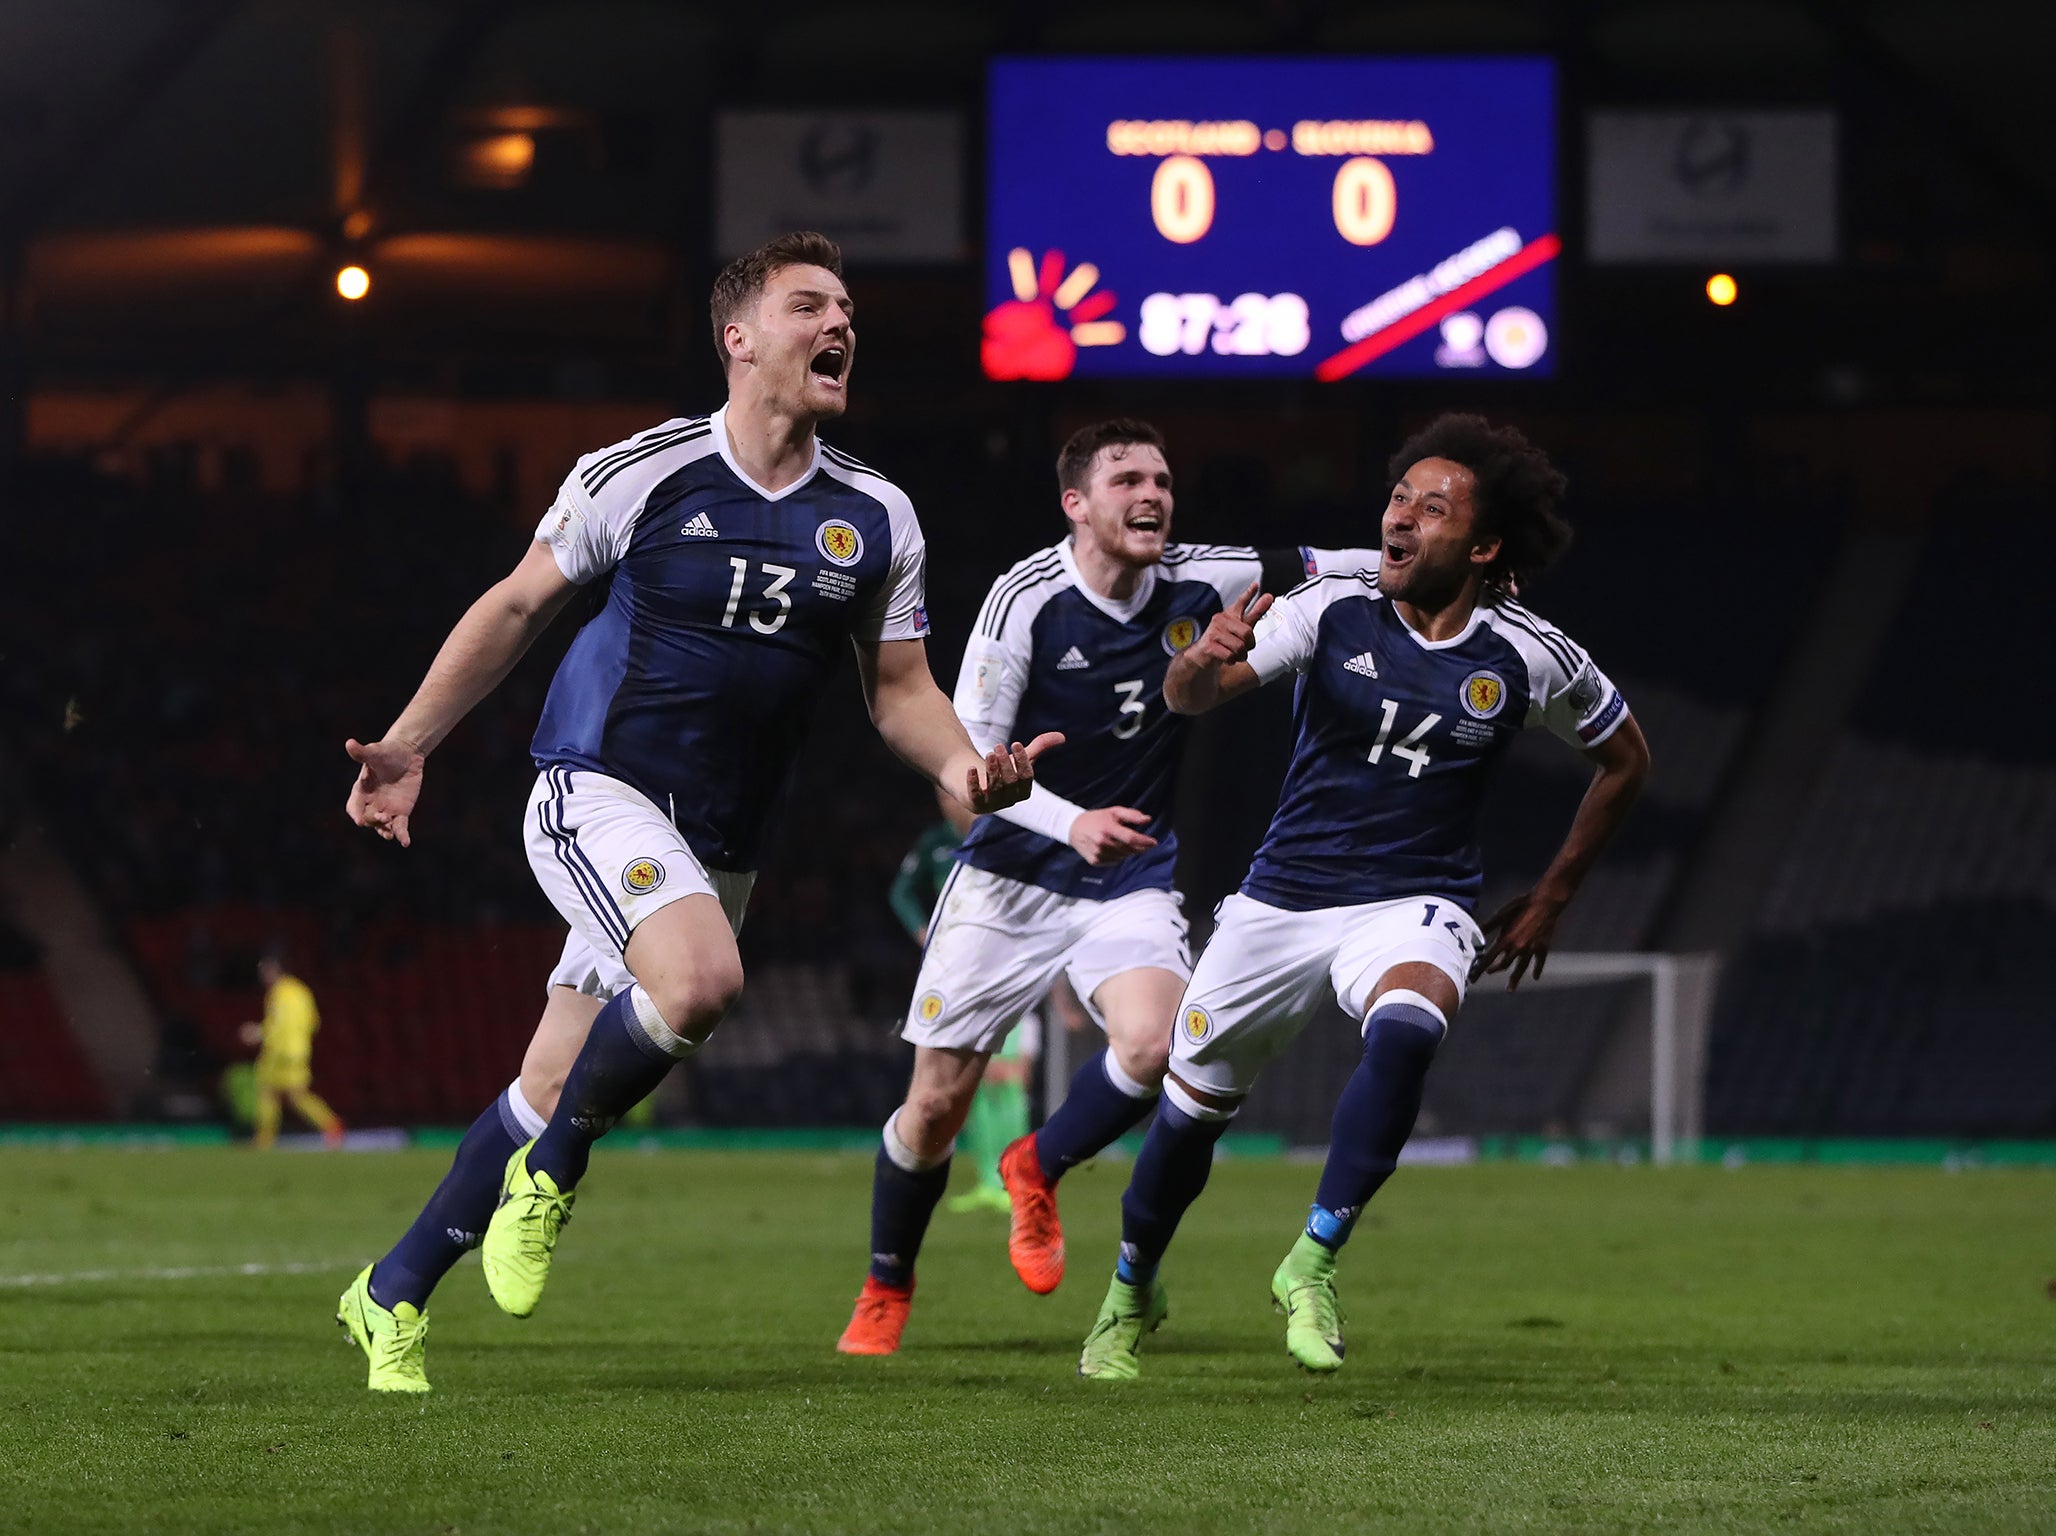 Scotland need to win their remaining two matches